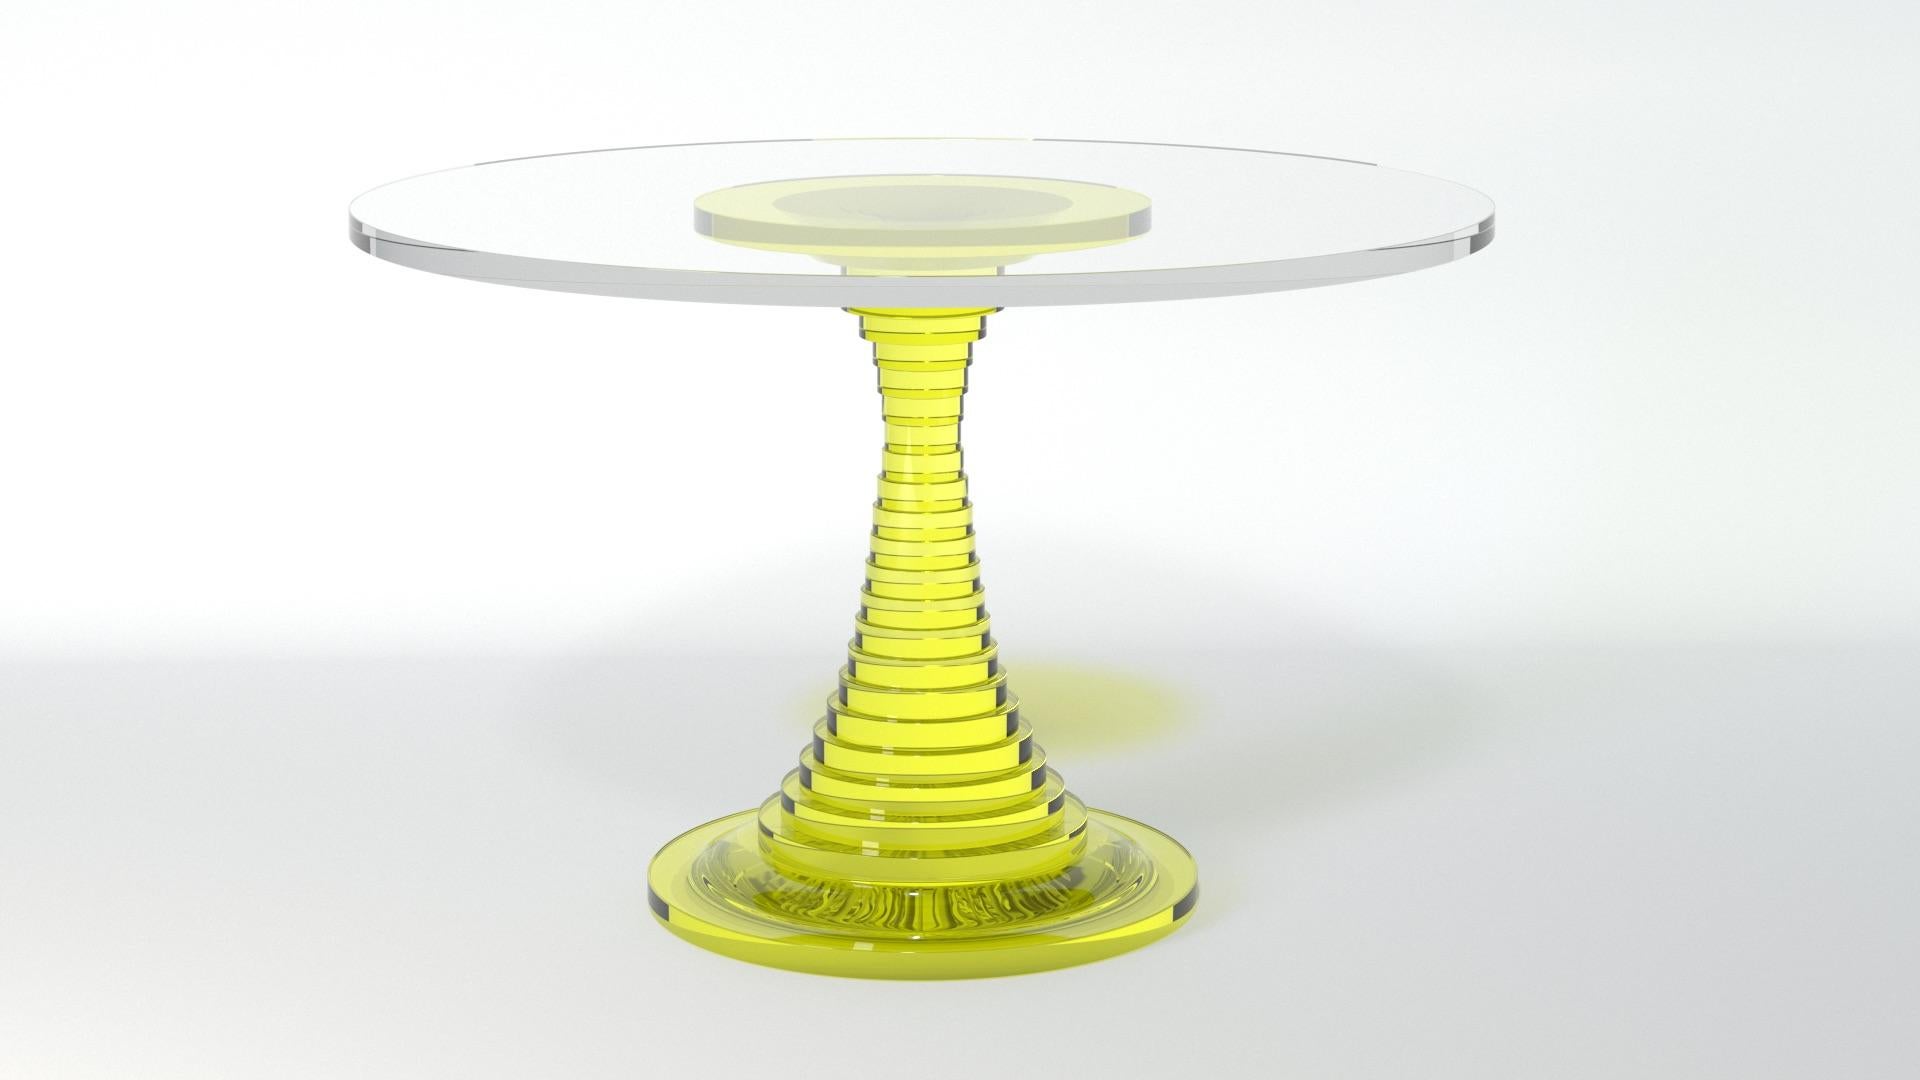 Plexiglass Tribute Dining Table to Carlo De Carli by A. Guerriero and Studio Superego For Sale